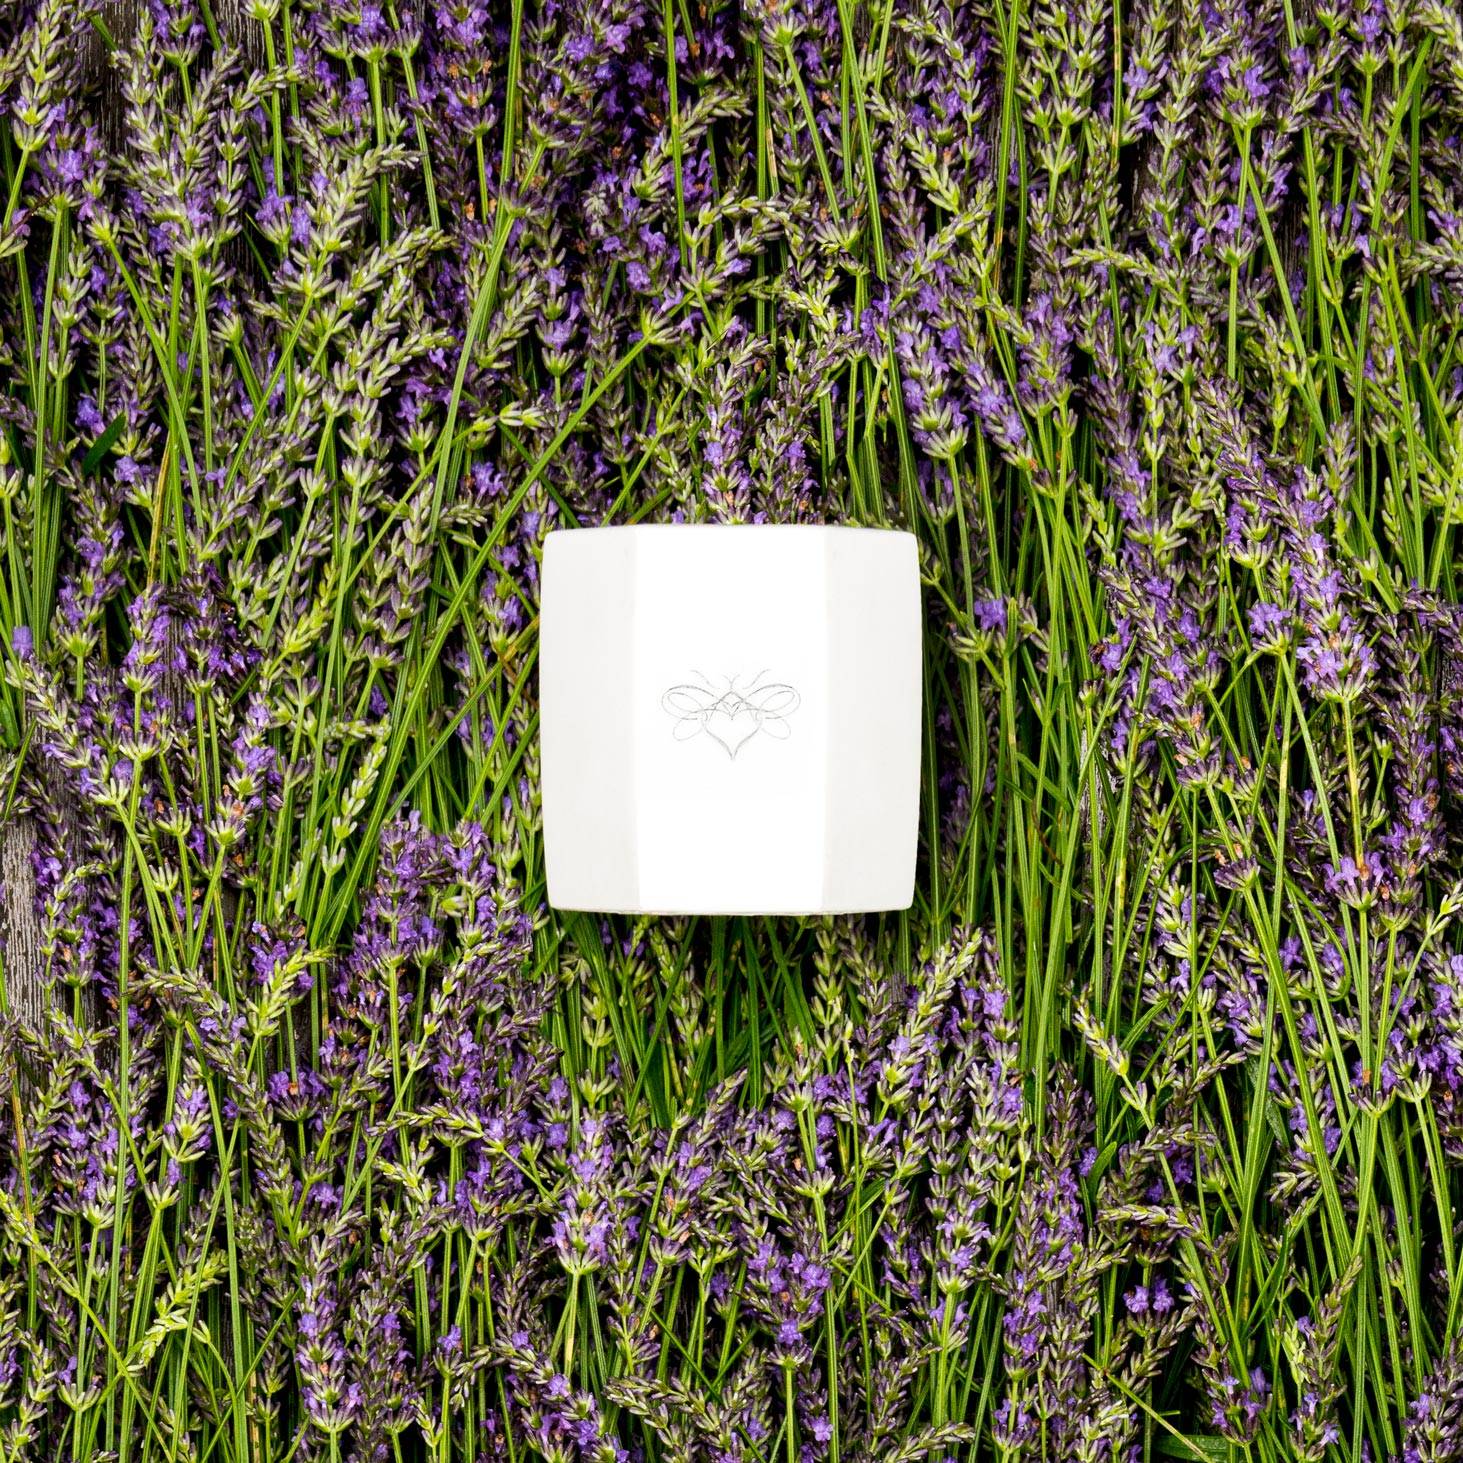 Large stone candle lying on a bed of lavender